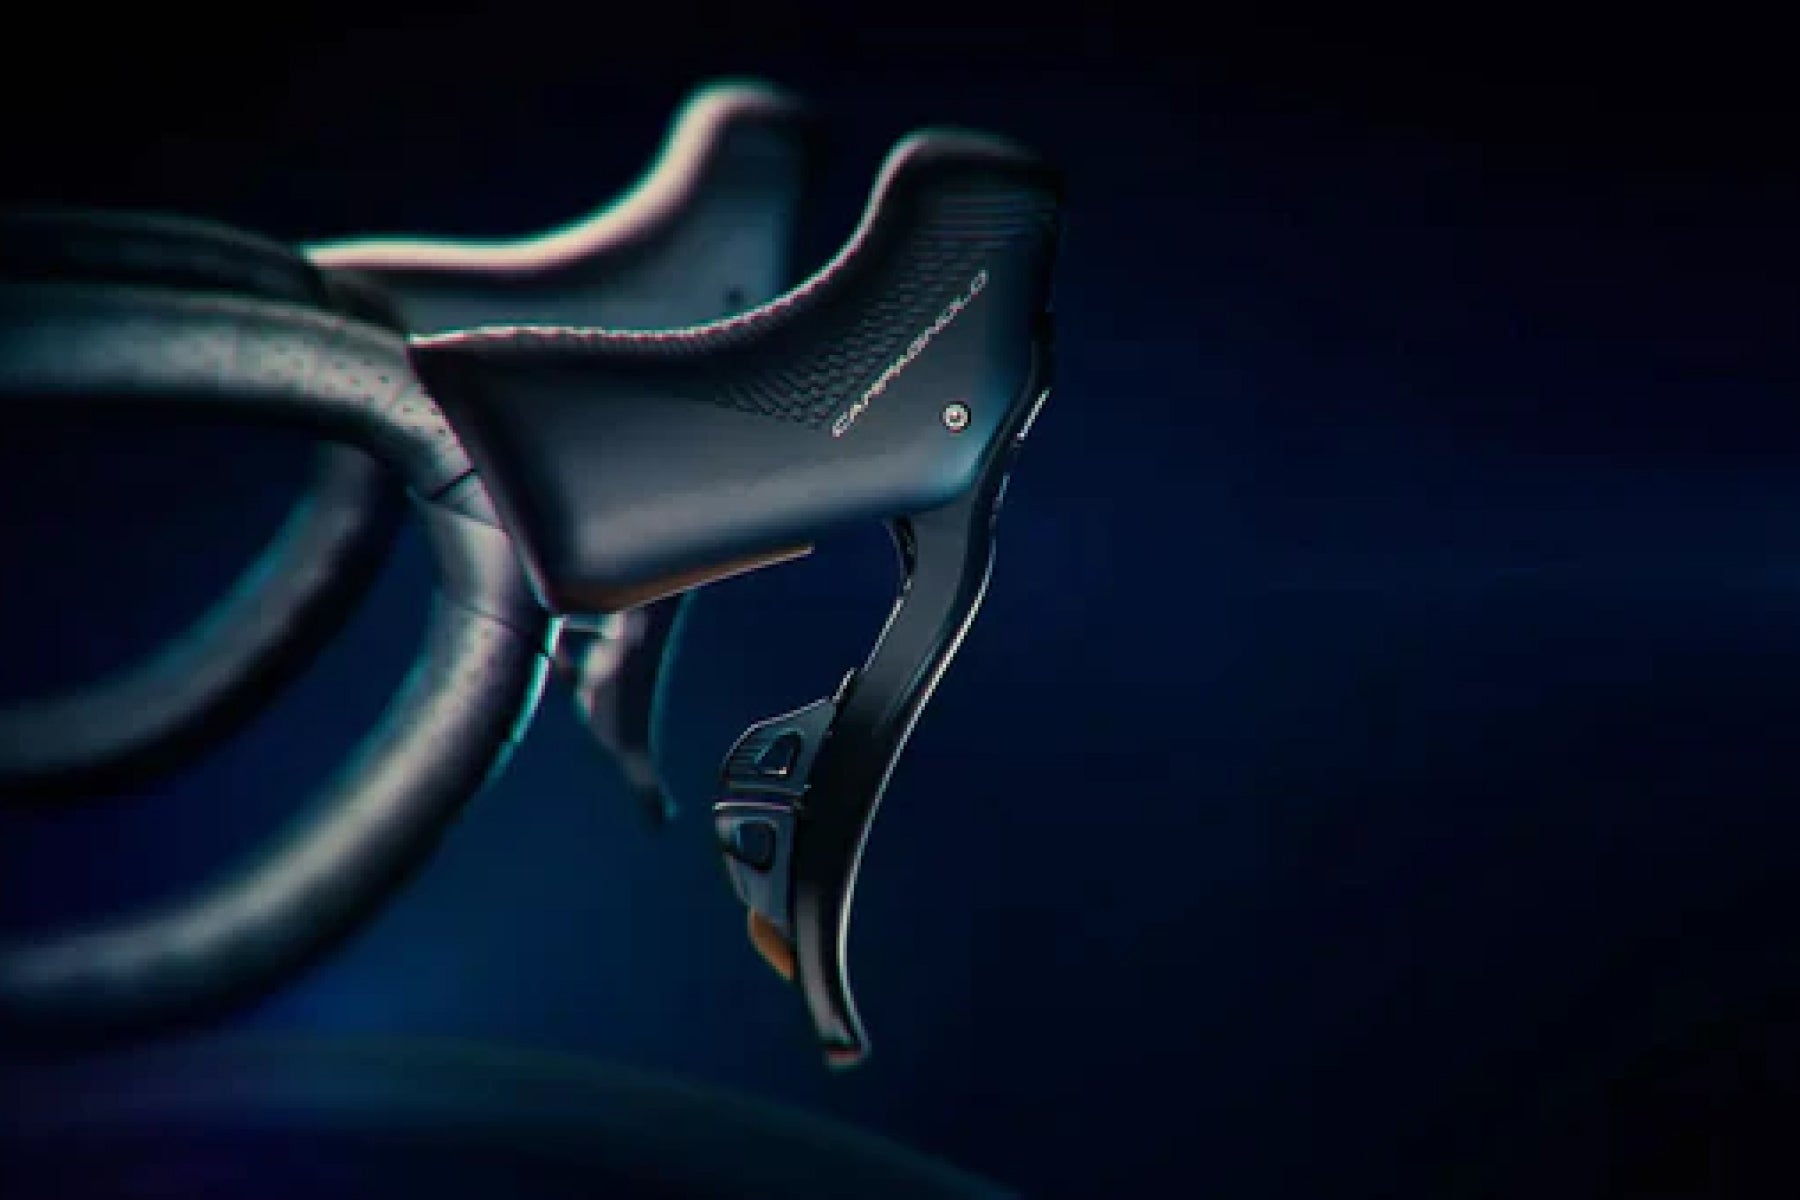 Unveiling the new Campagnolo Super Record